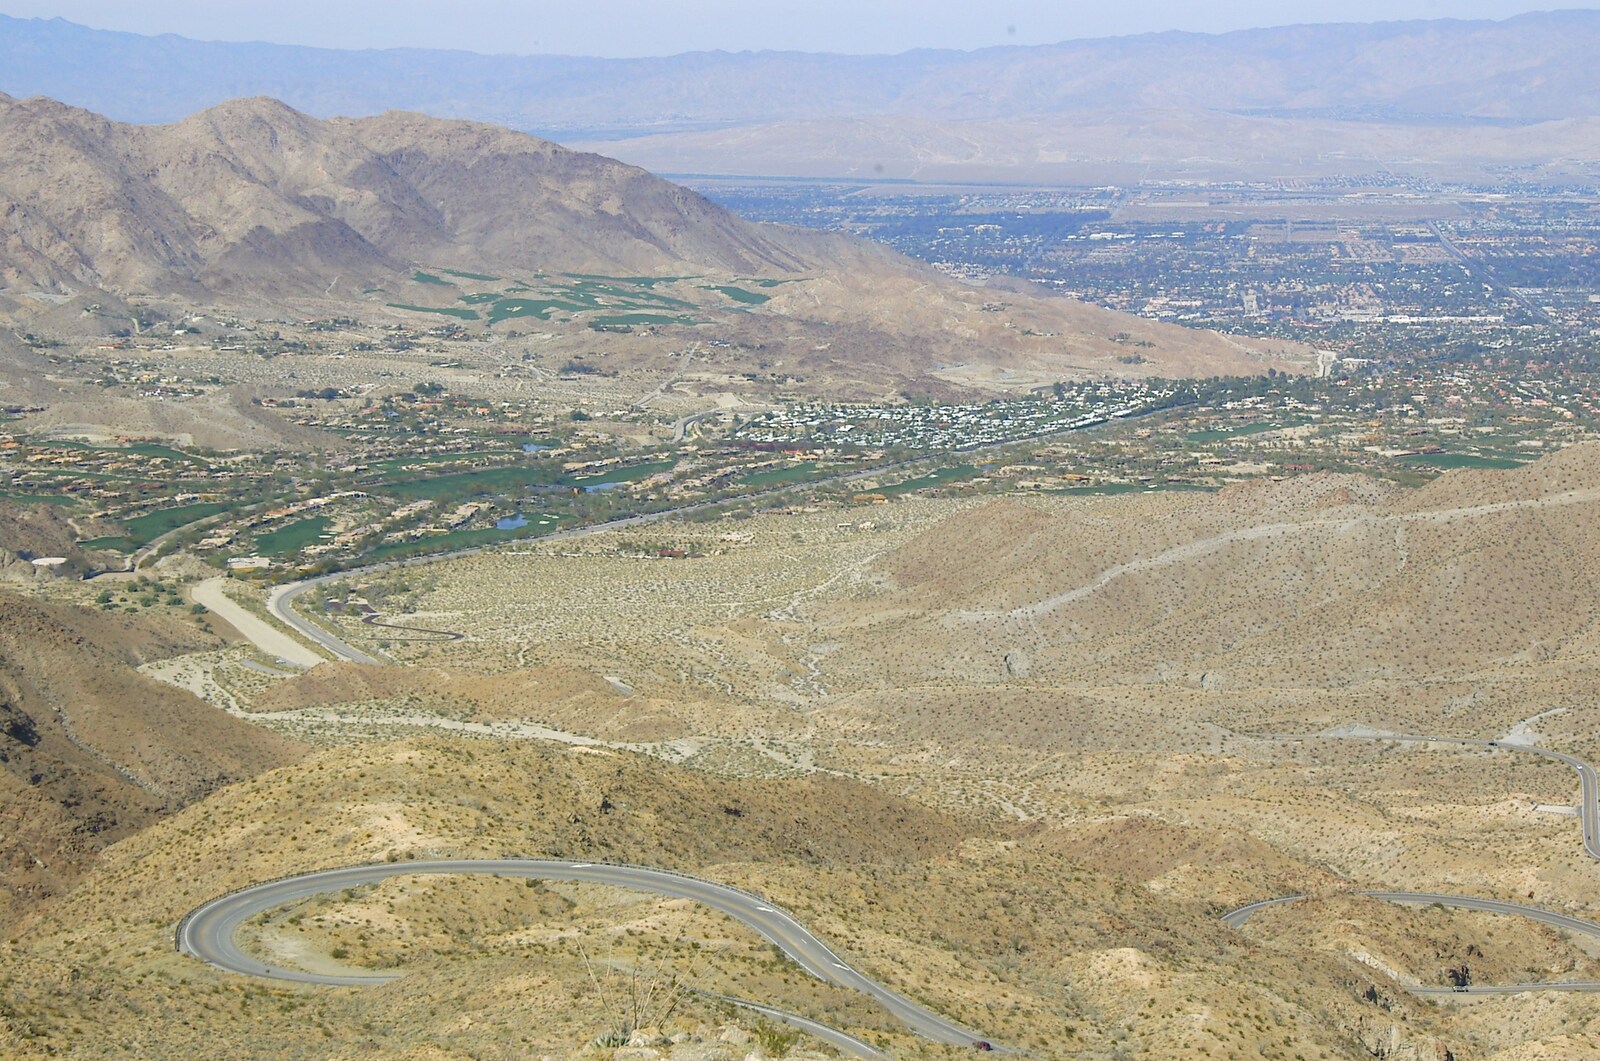 Palm Springs is down below from Mojave Desert: San Diego to Joshua Tree and Twentynine Palms, California, US - 5th March 2006